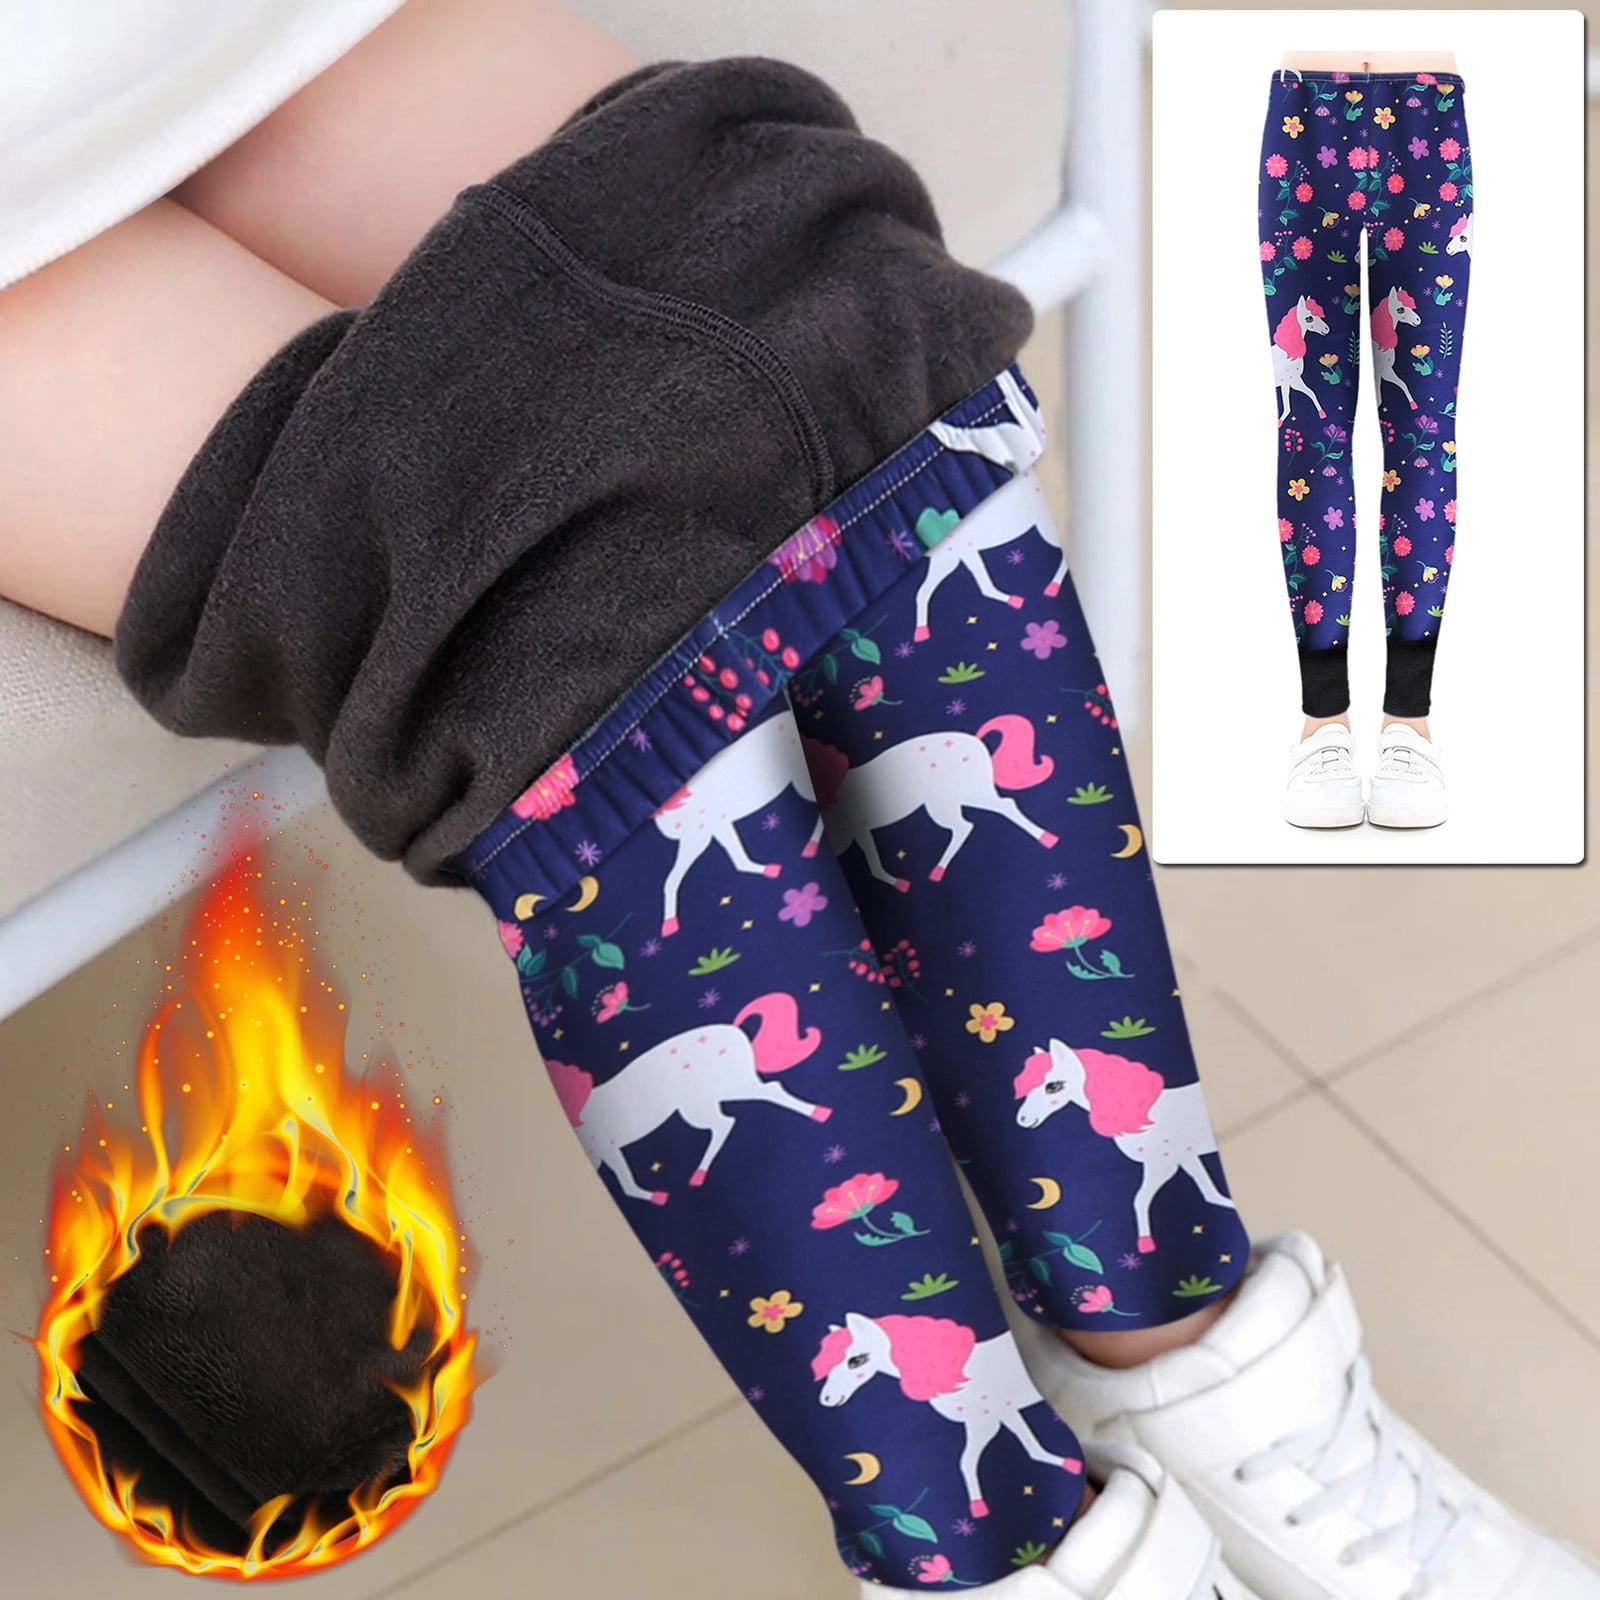 Kids Leggings For Girls Children Spring Autumn Clothes 2020 Cotton Trousers  Casual Girl Long Pants 4 6 8 10 12 14 Years - Kids Leggings - AliExpress